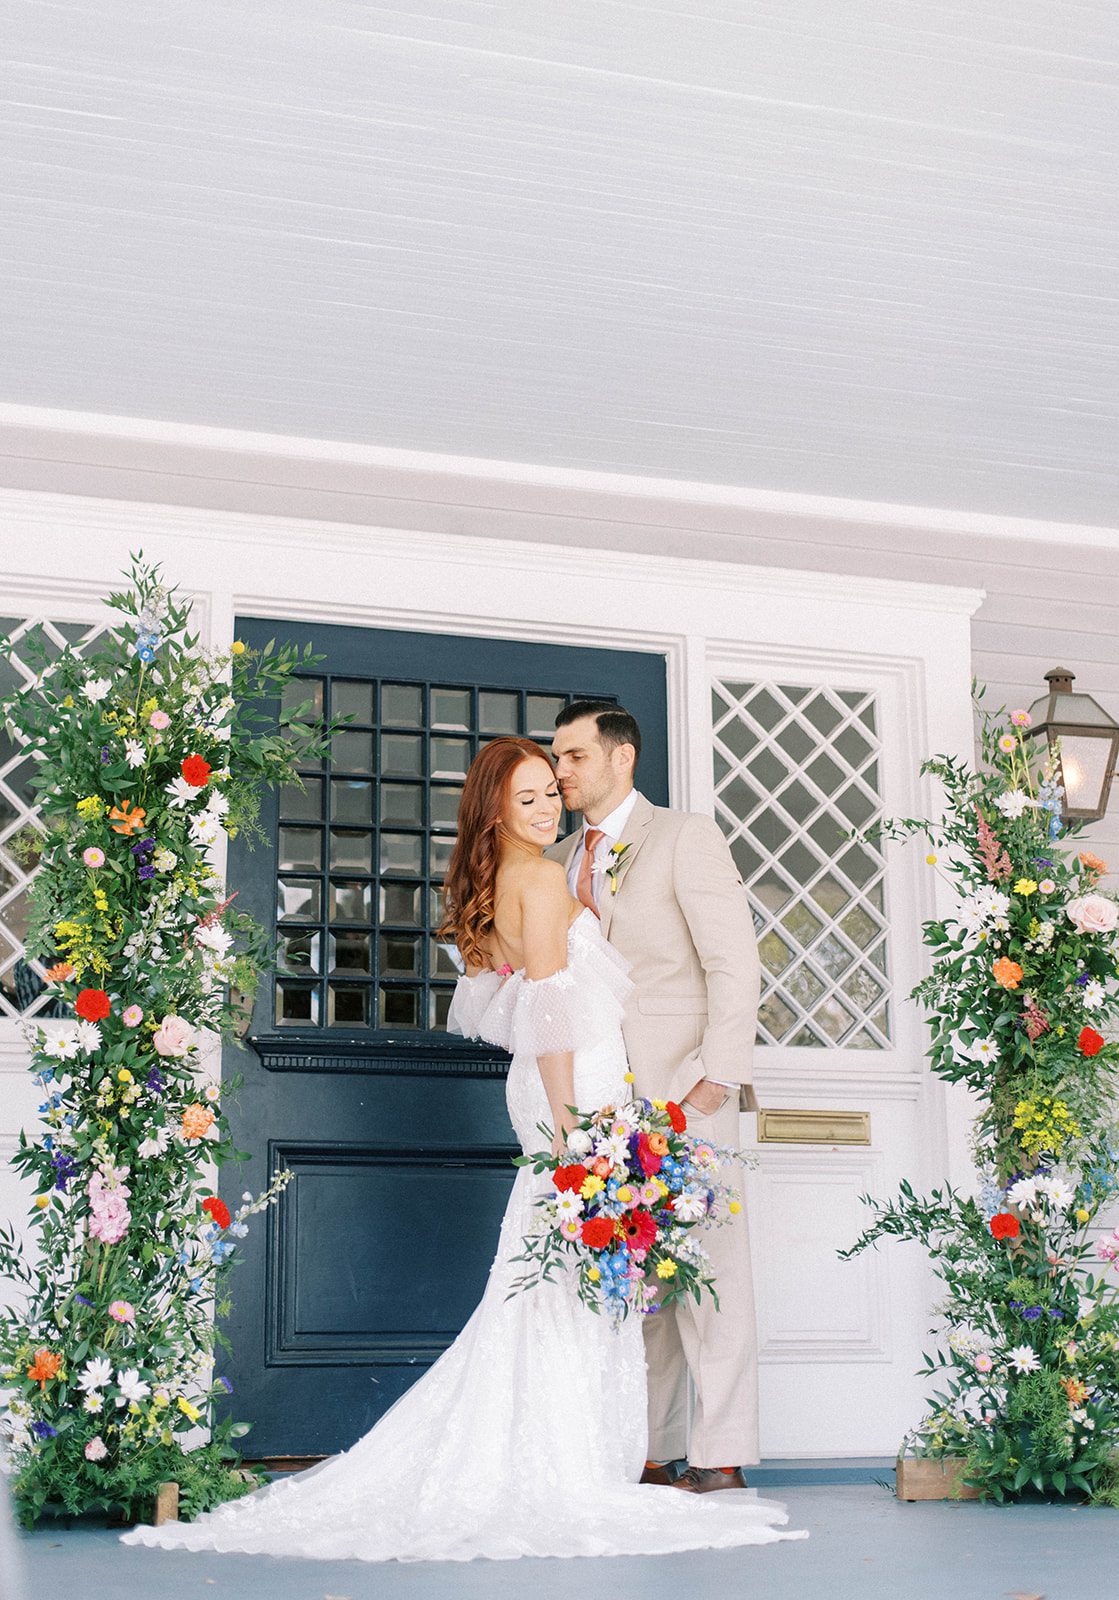 retro inspired wedding at the Orlo wedding venue in Tampa Florida with bride in a lace gown and groom in a cream suit embracing and the groom kissing the bride's cheek on a front porch